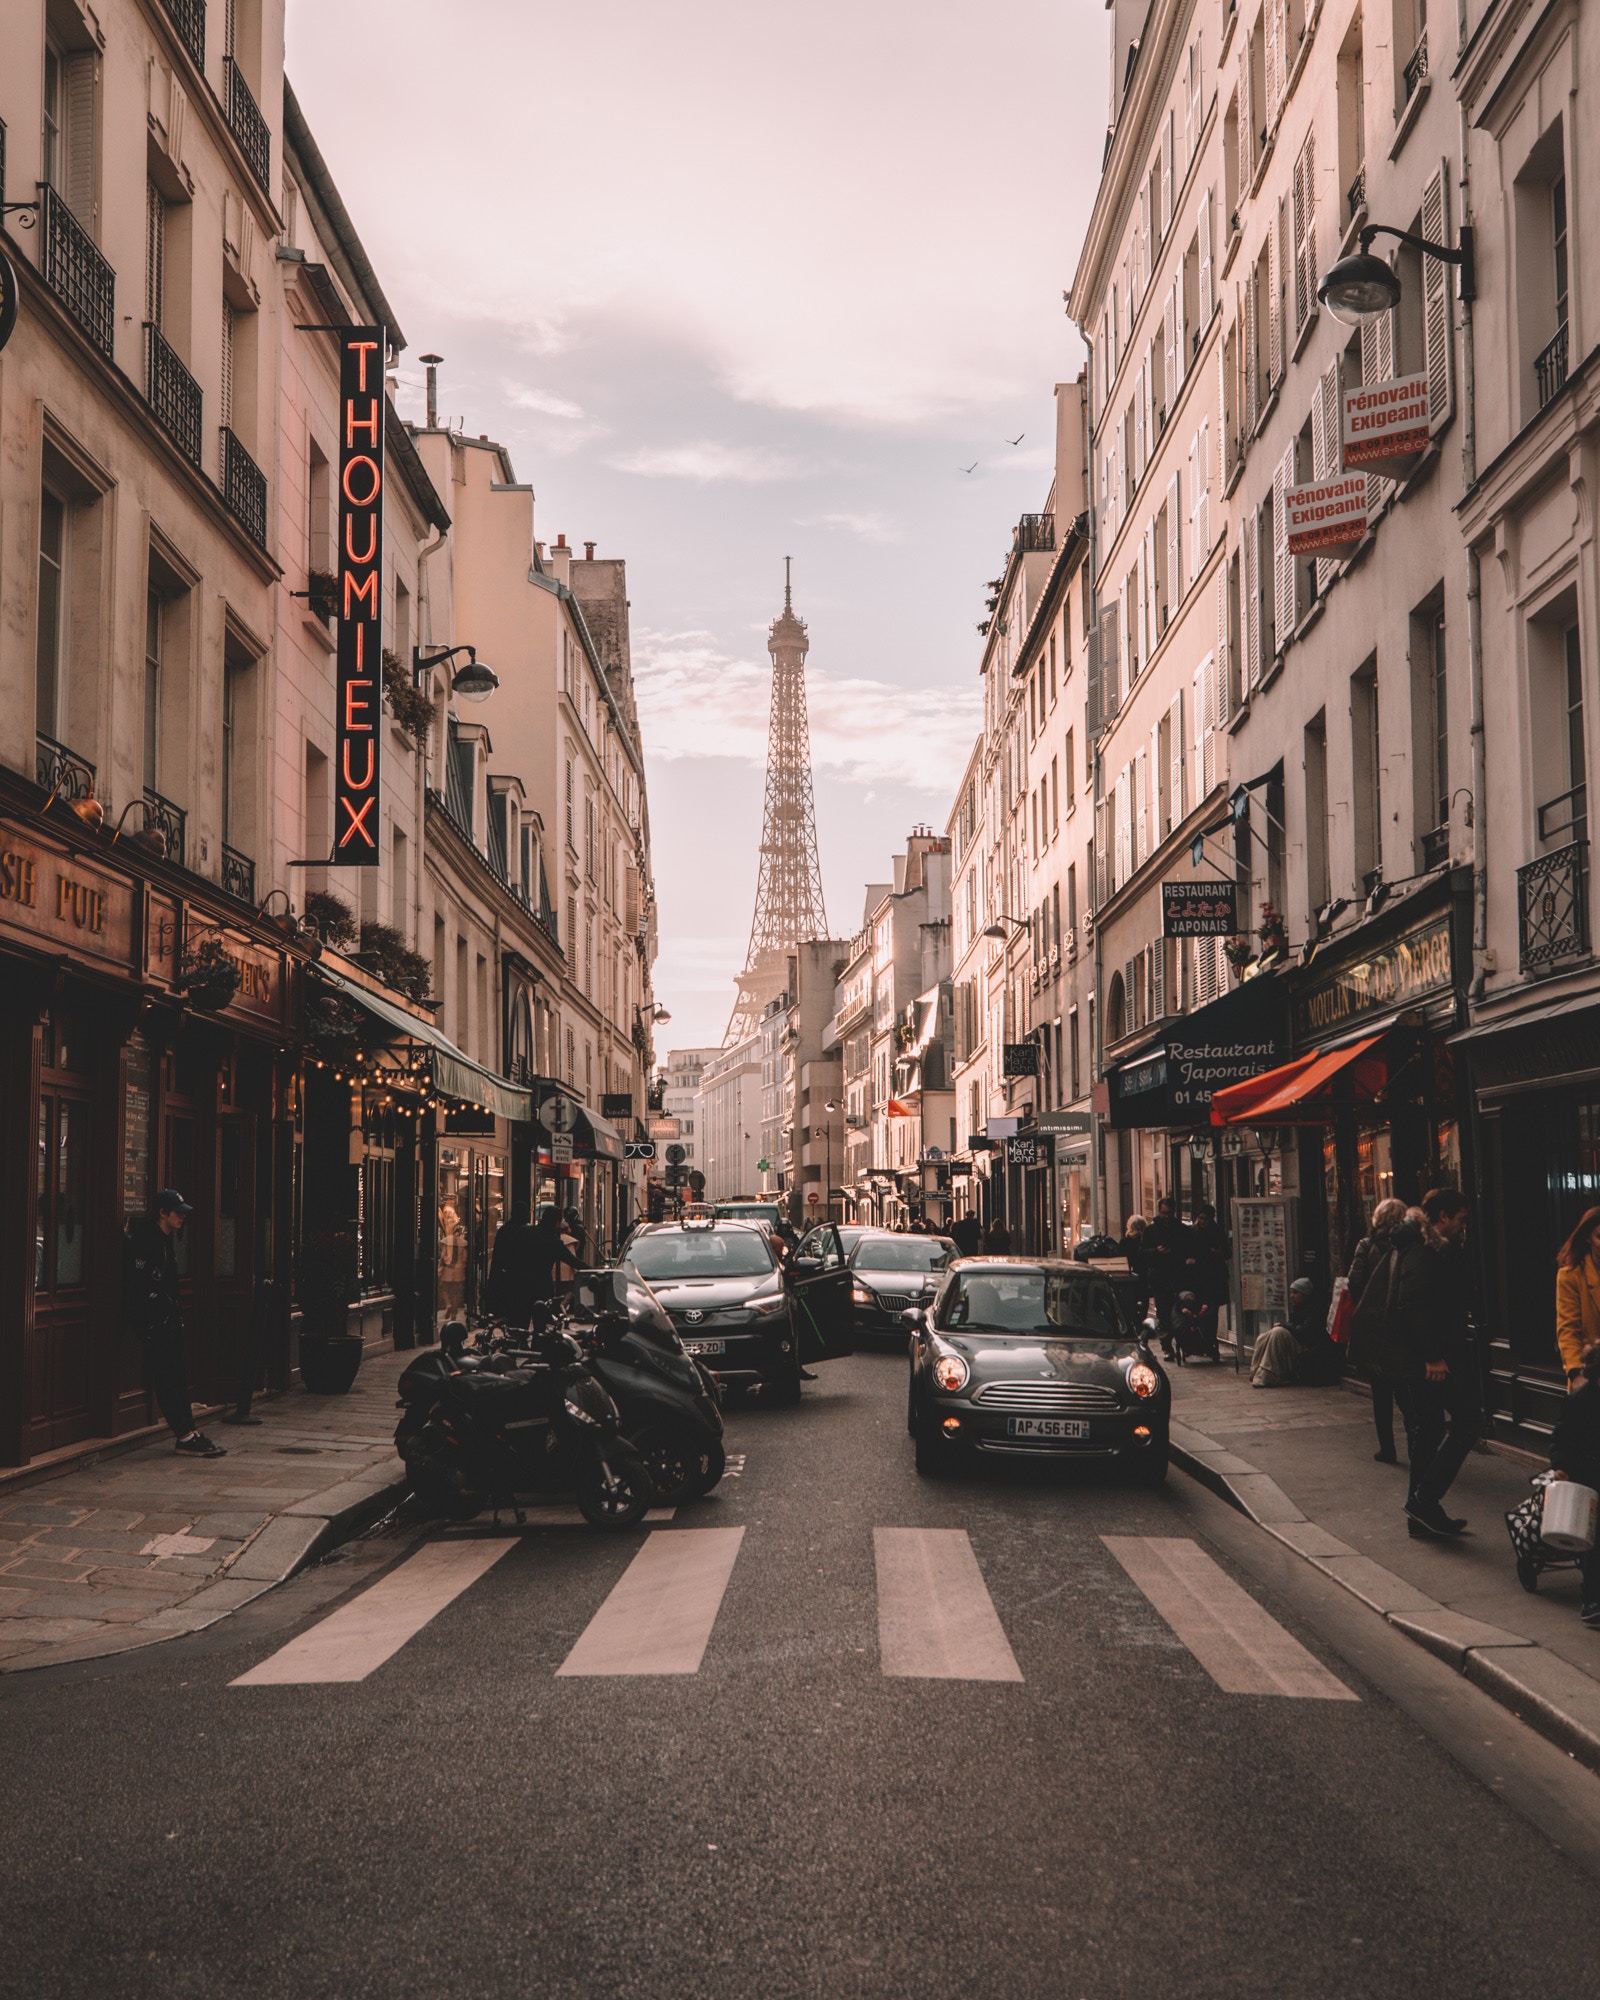 Typical Paris street in the afternoon.